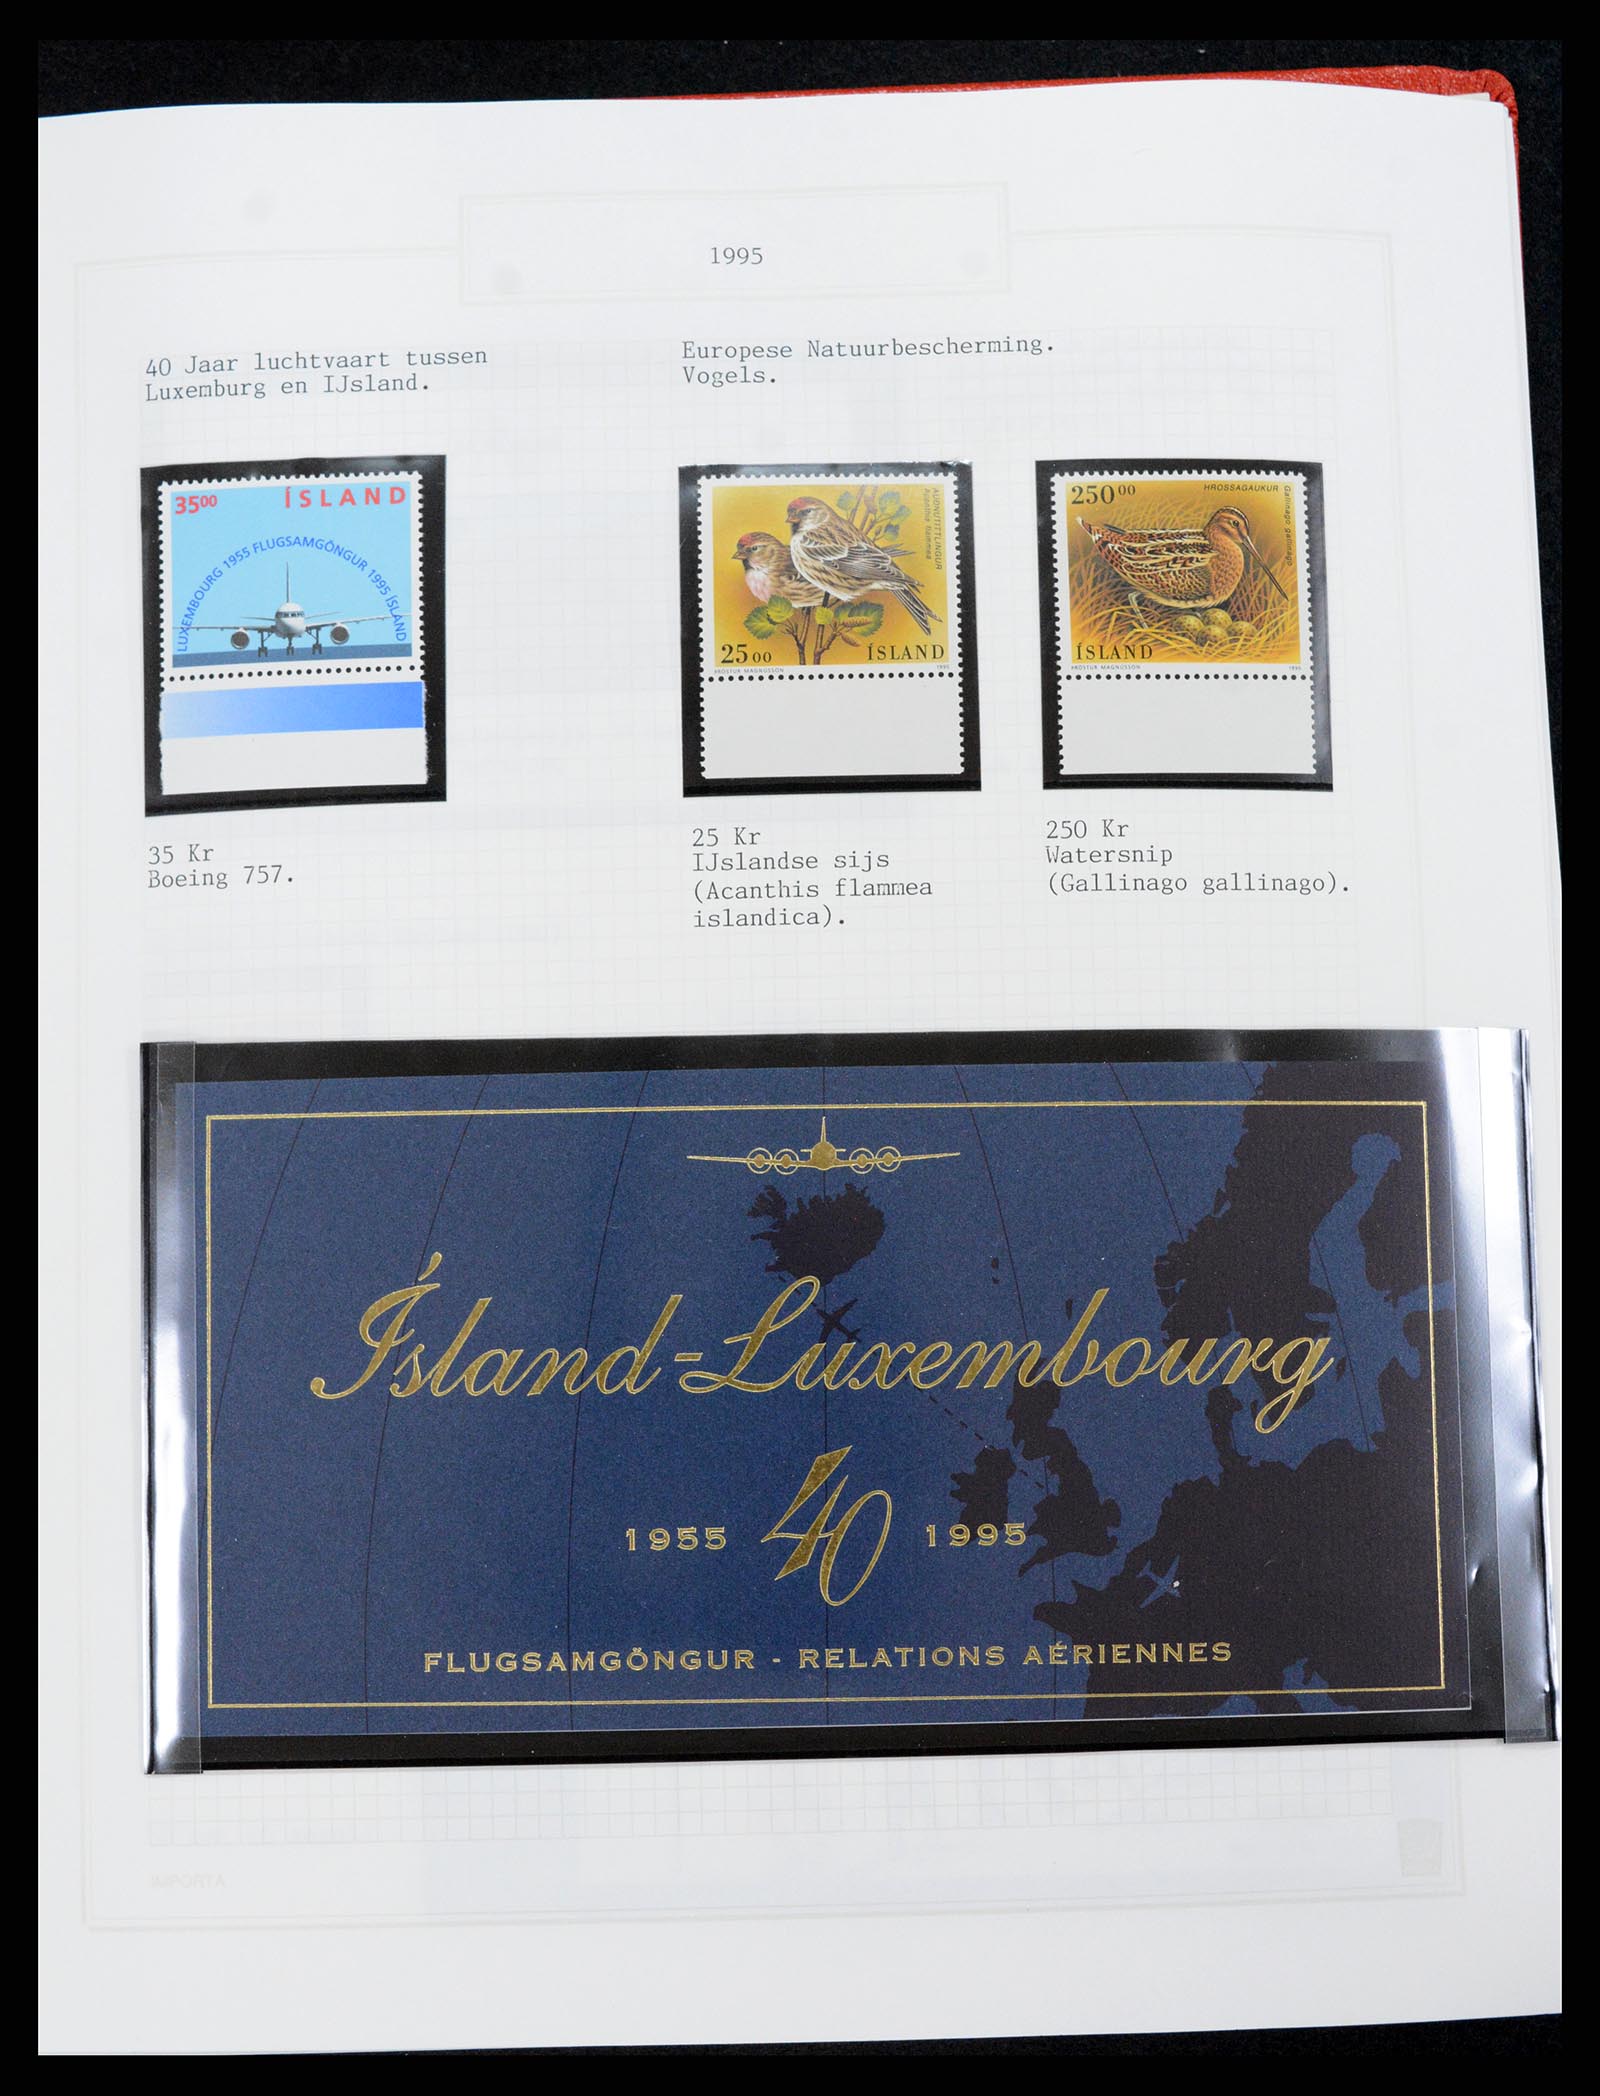 37300 093 - Stamp collection 37300 Iceland 1873-2000.